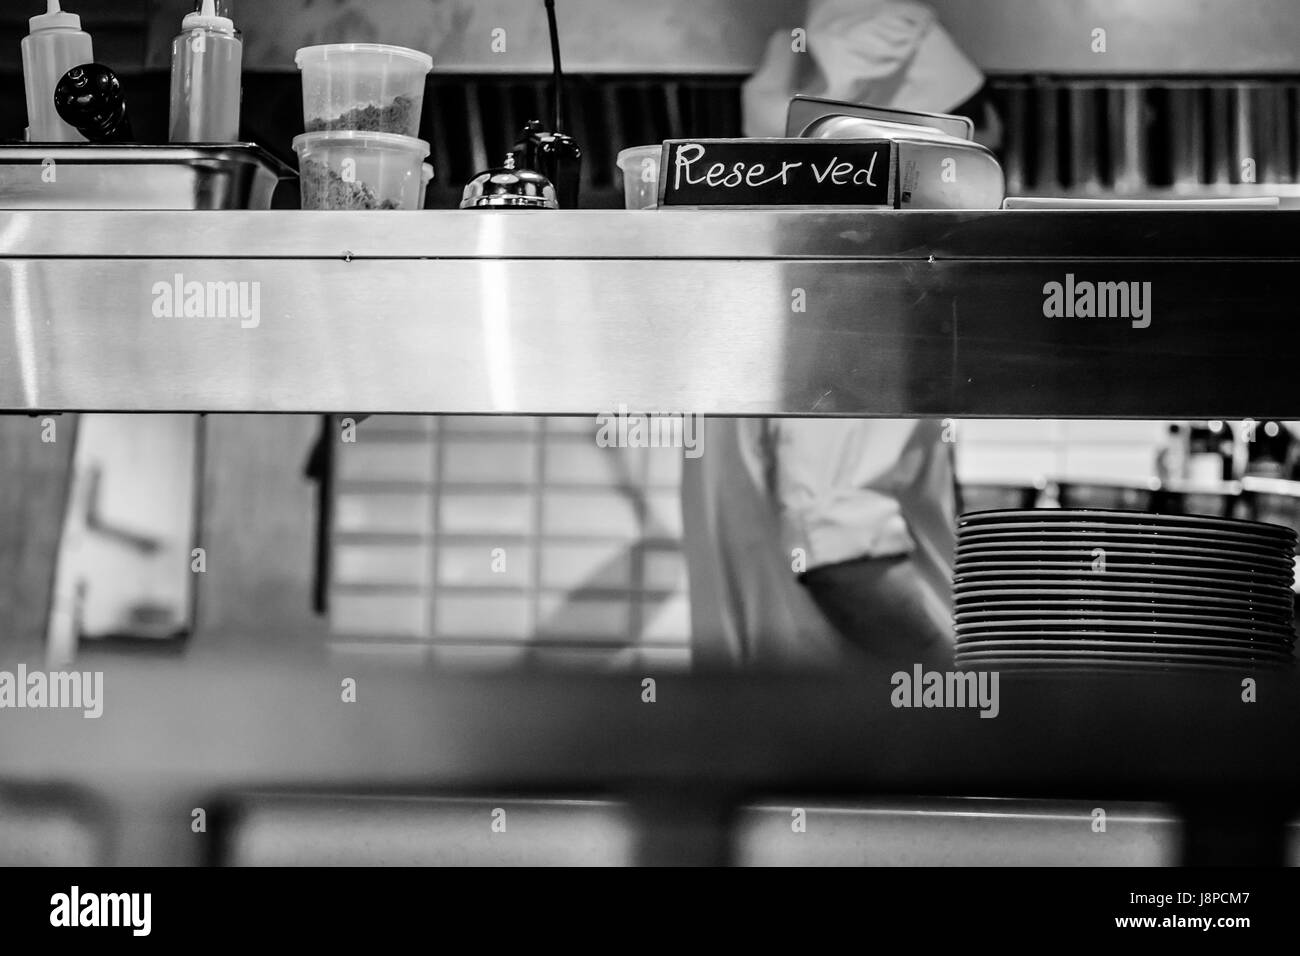 Retro restaurant kitchen close up with Reserved table and a chief cook on the  background. Black and white Stock Photo